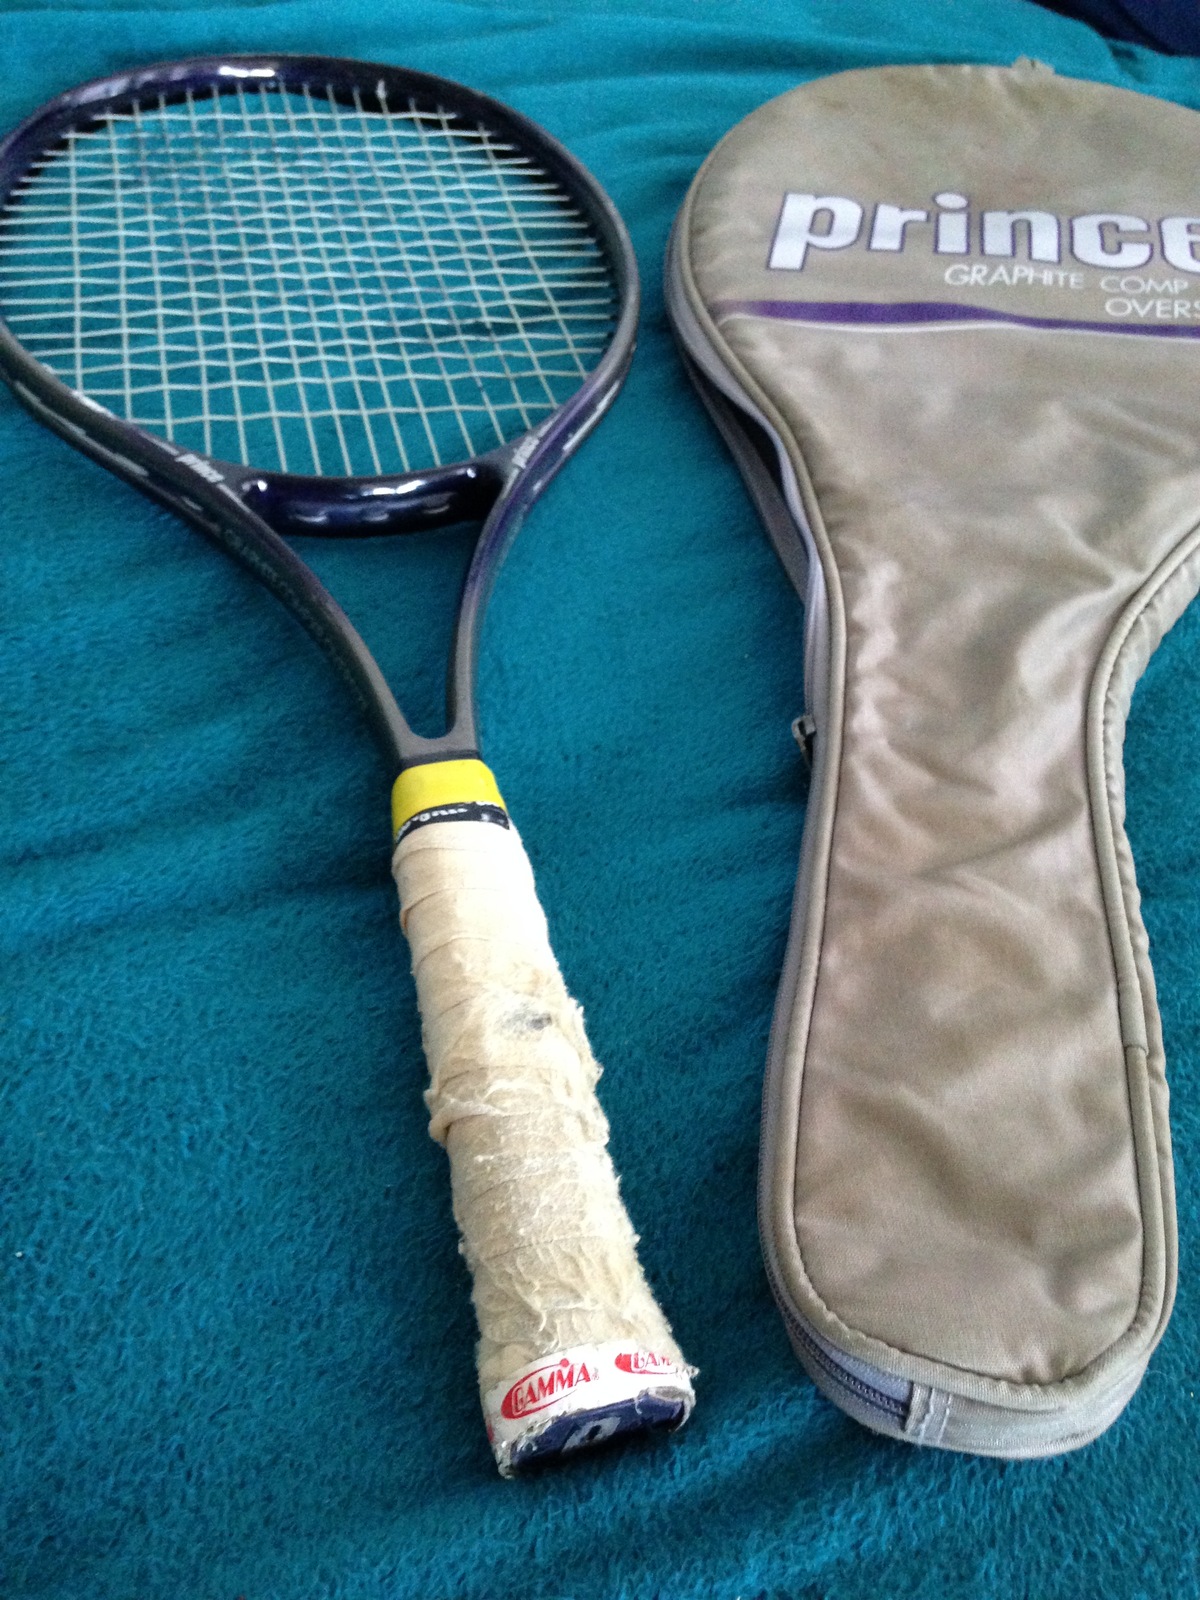 Replacement Parts for Tennis Racquet Prince Tour Graphite MP 7g821115 for sale online 